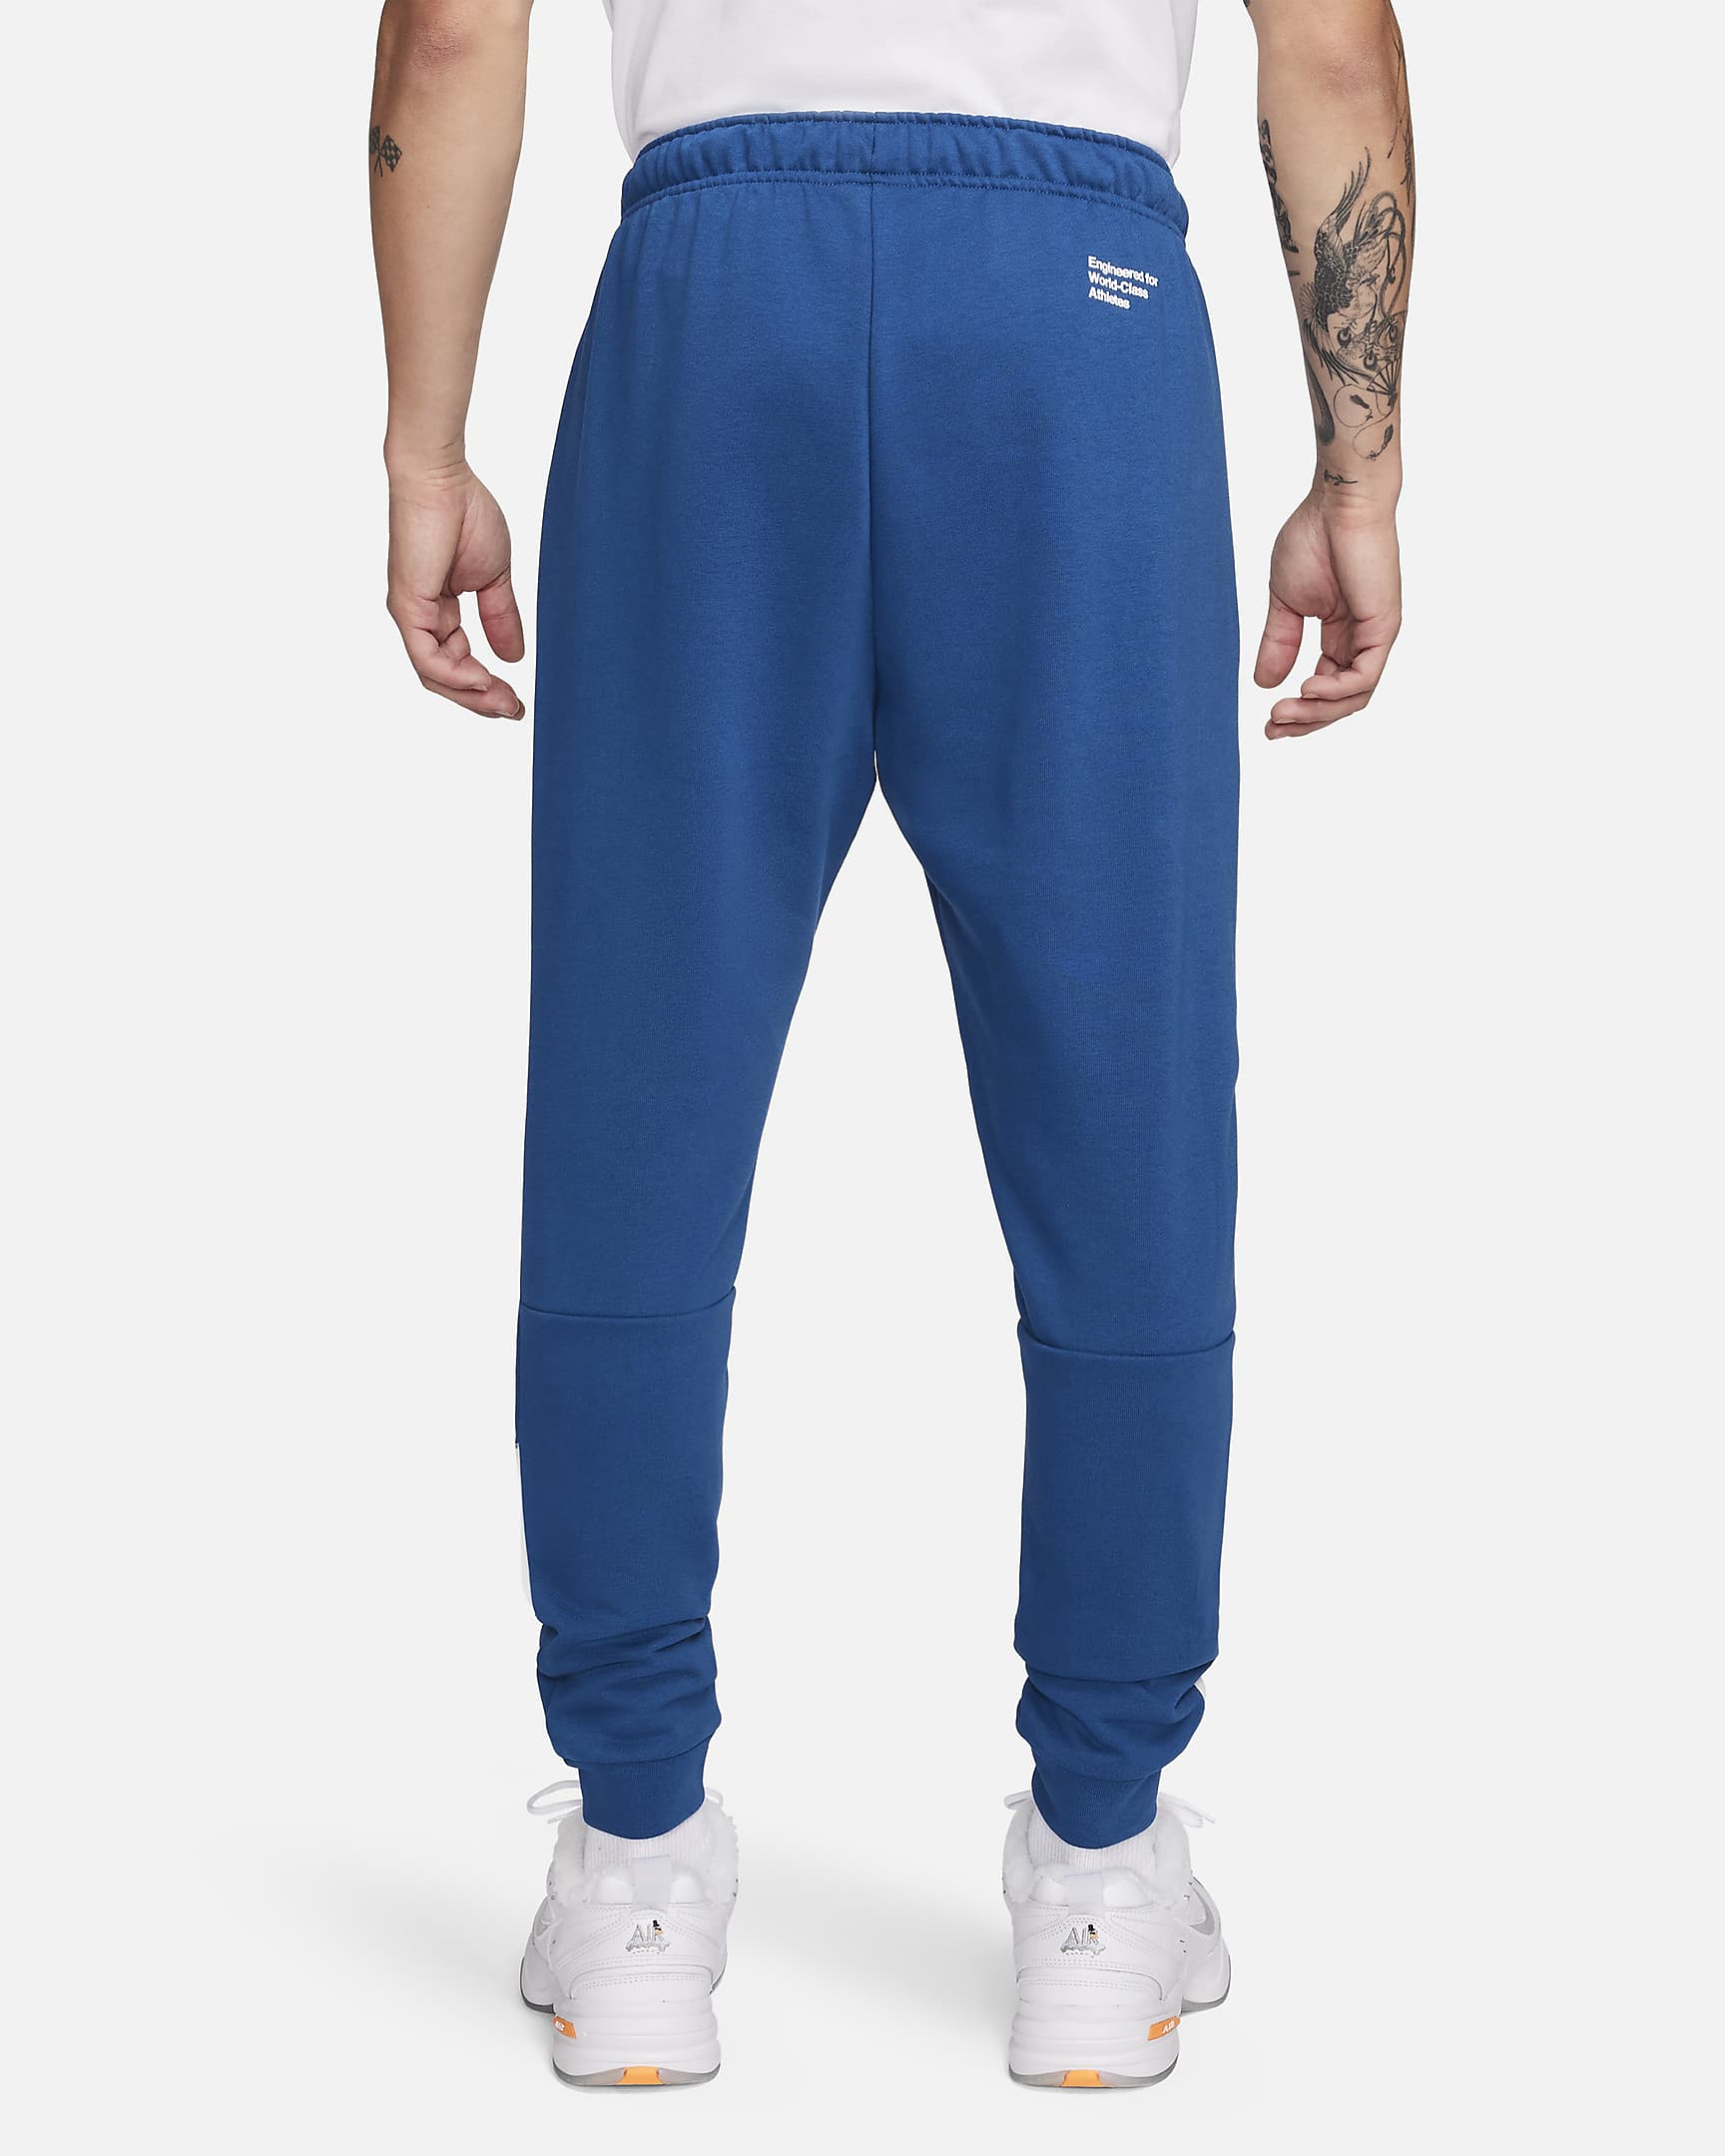 Nike Dri-FIT Men's Tapered Fitness Trousers. Nike VN